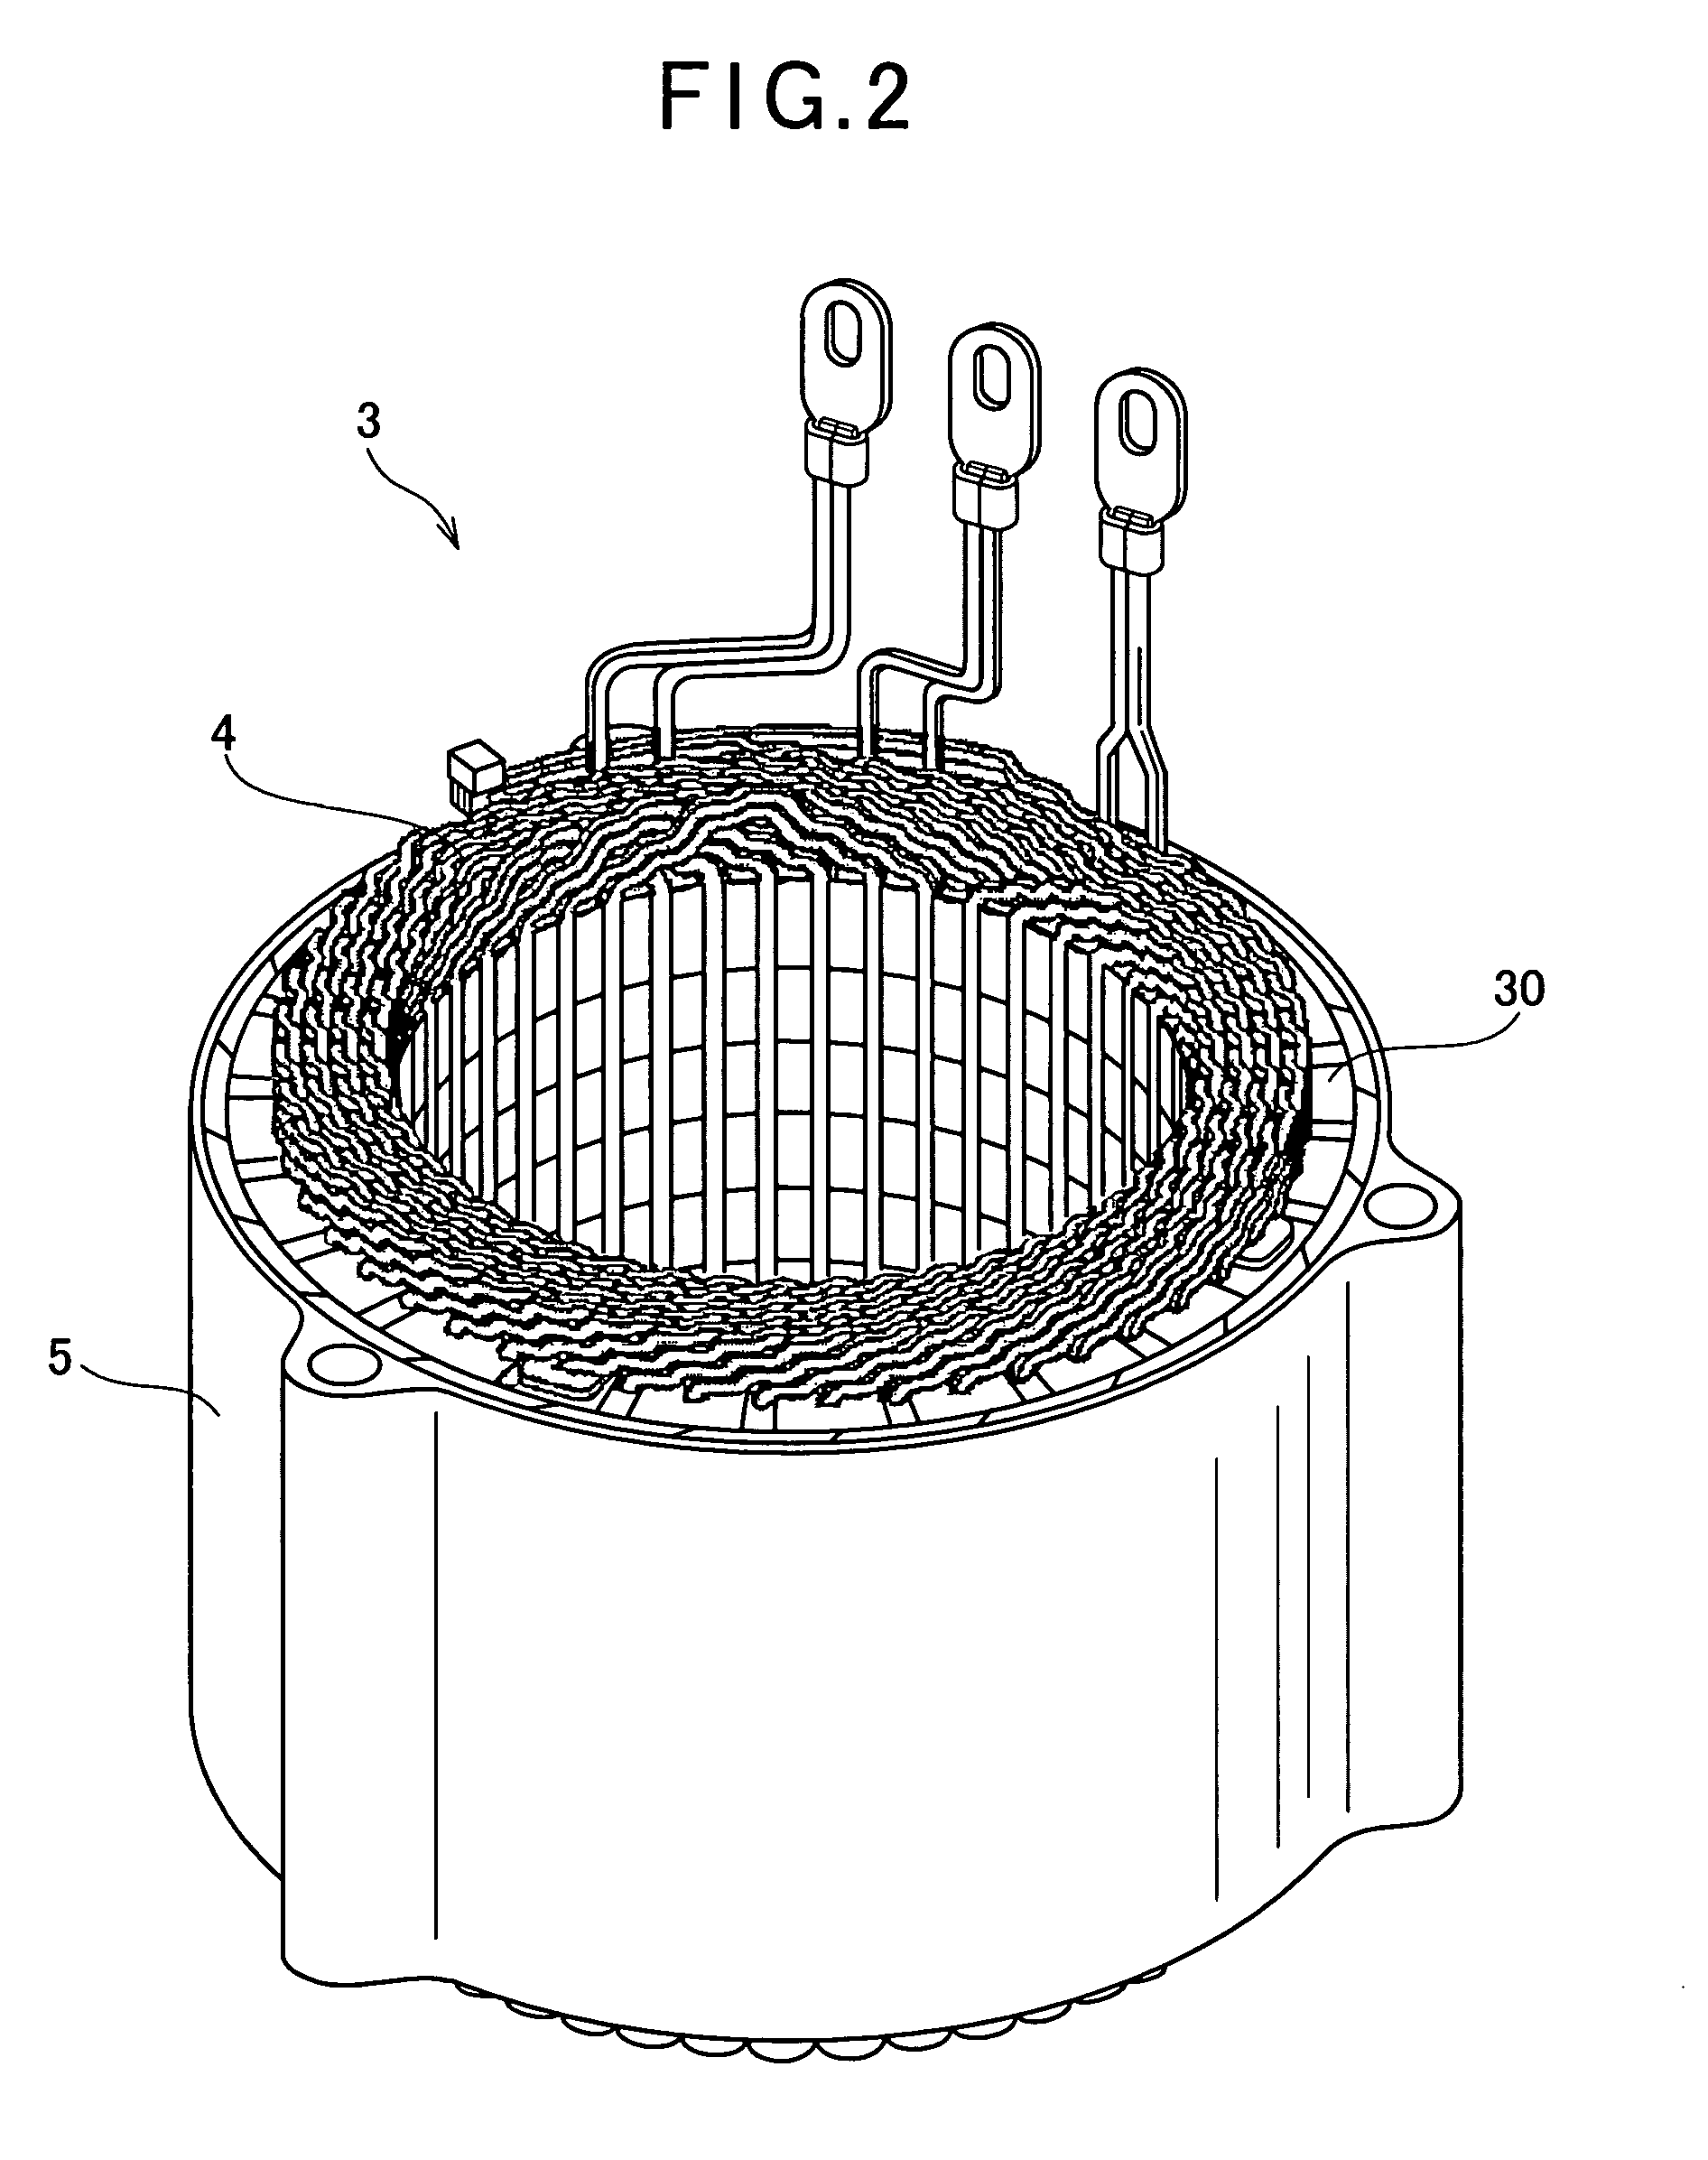 Method for manufacturing stators for rotary electric machines